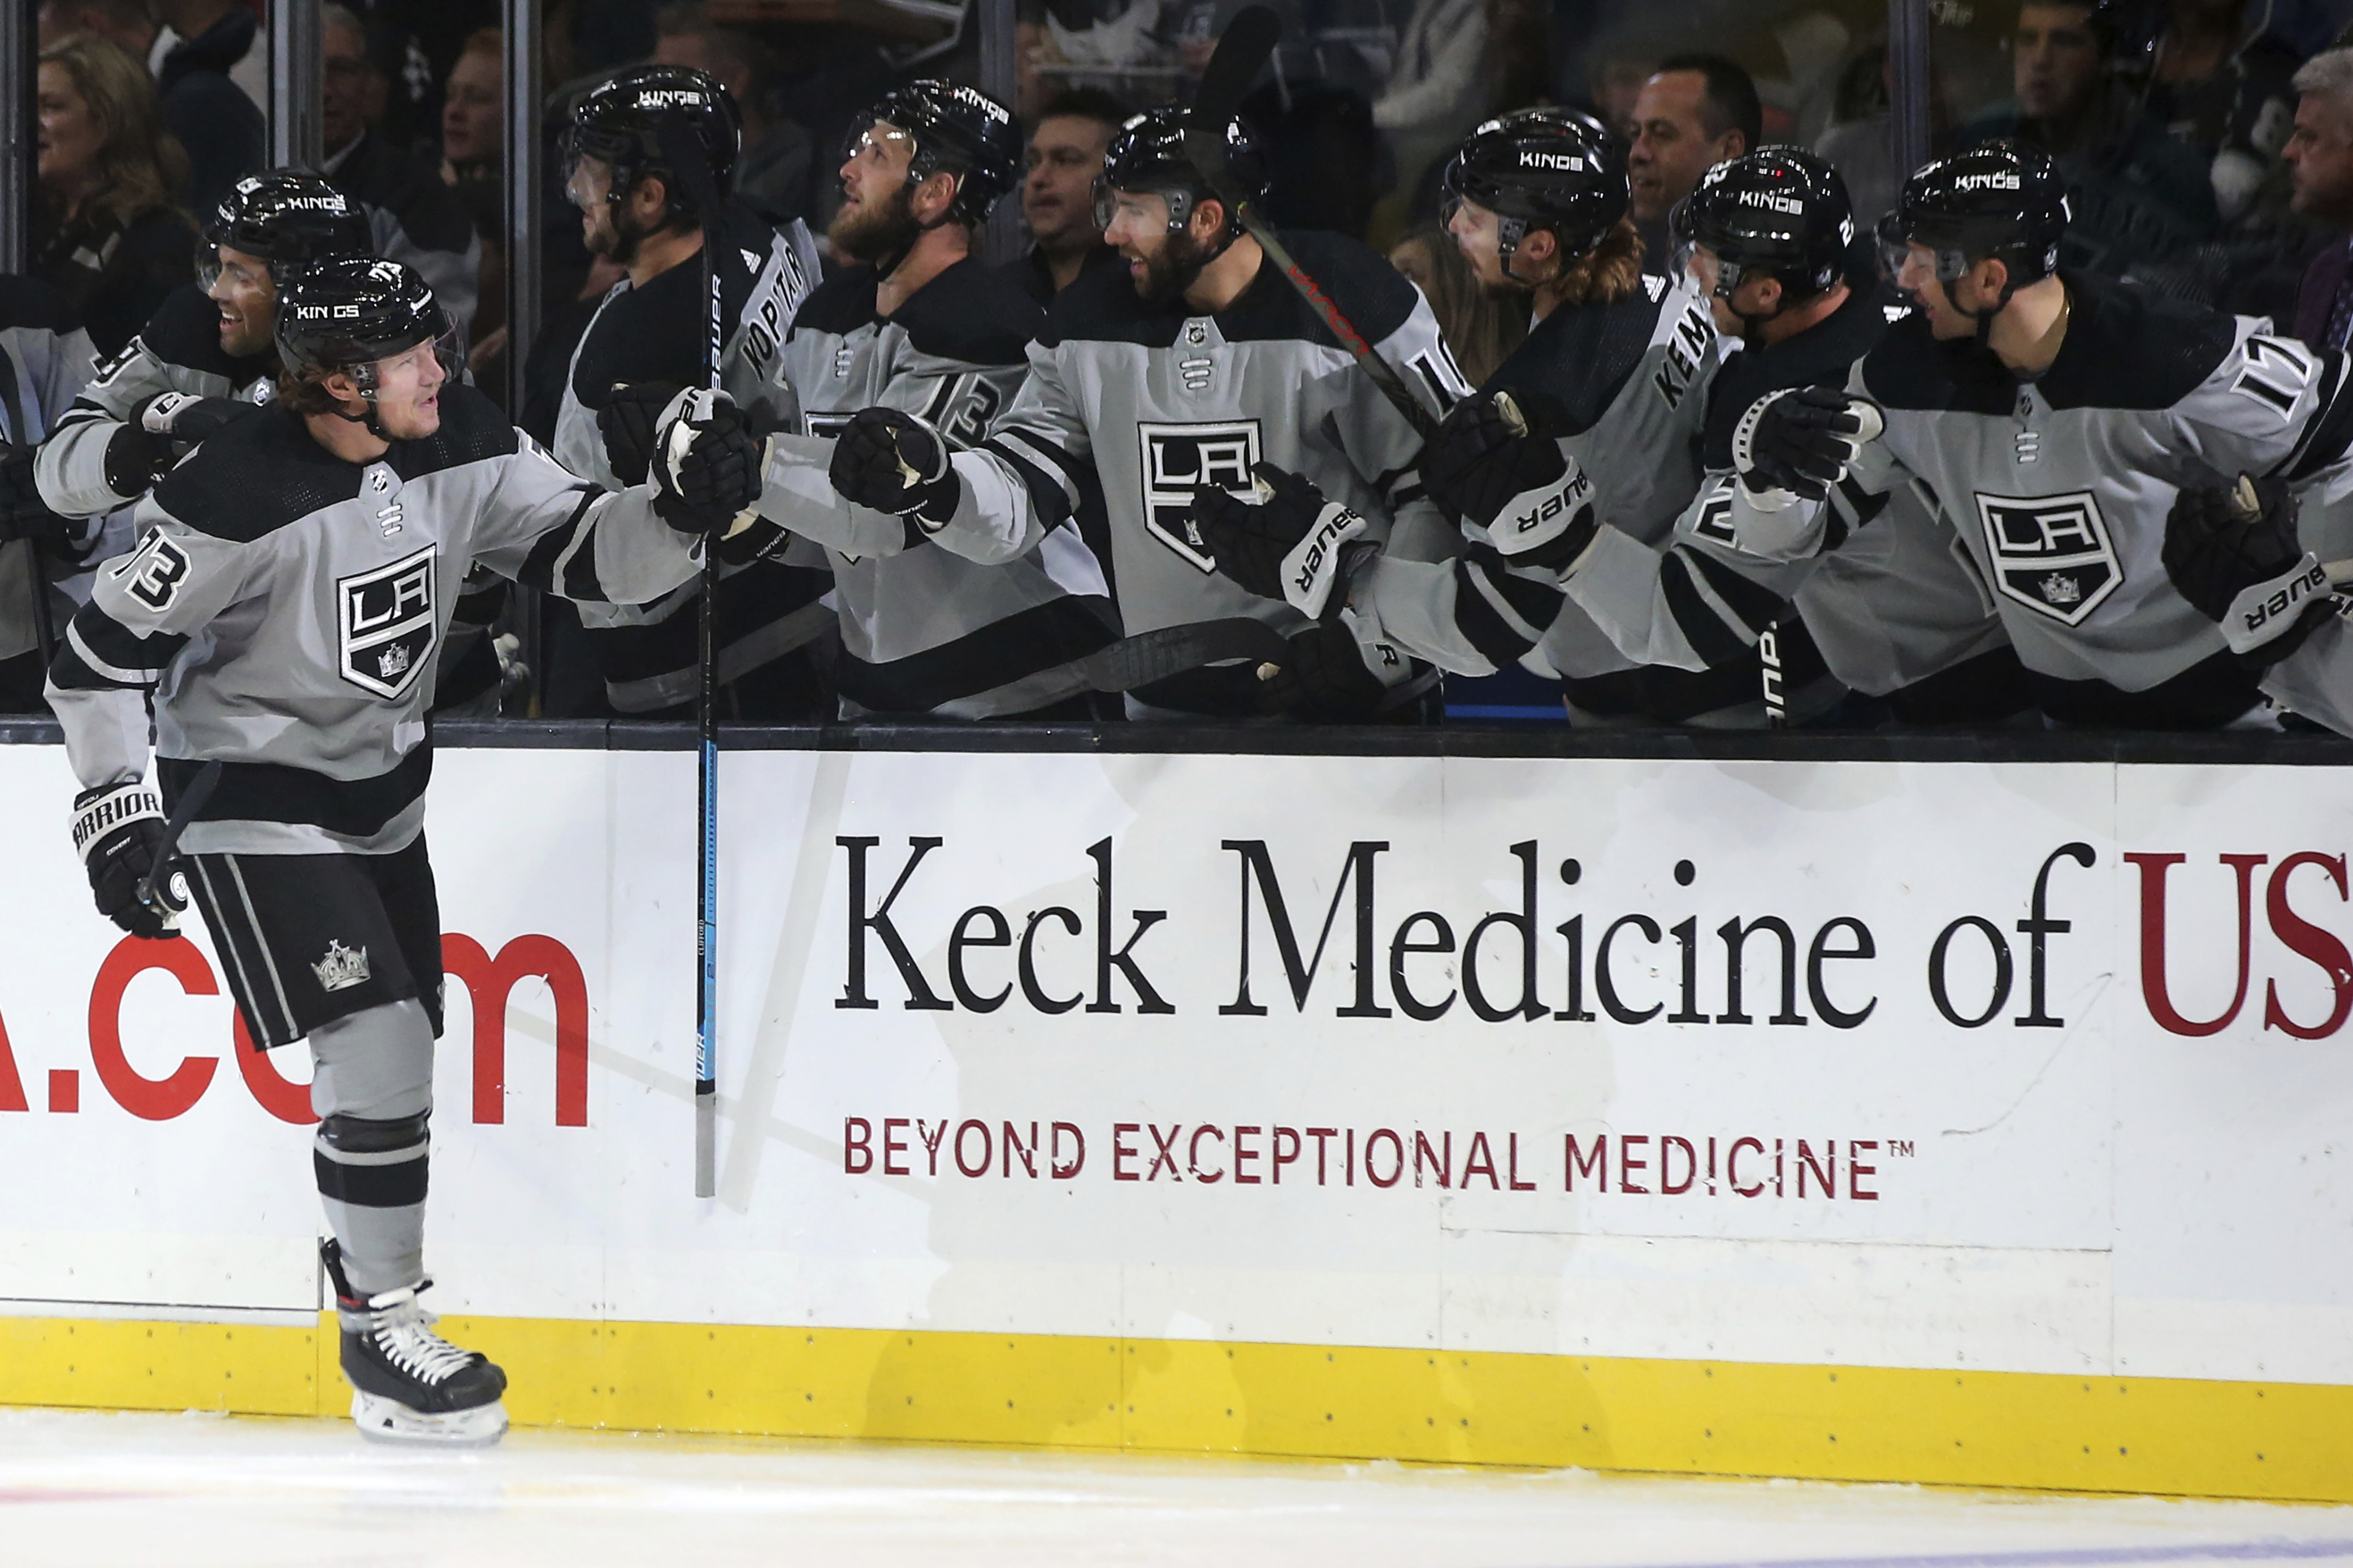 Carter helps Kings beat Flames 4-1 to snap 3-game skid